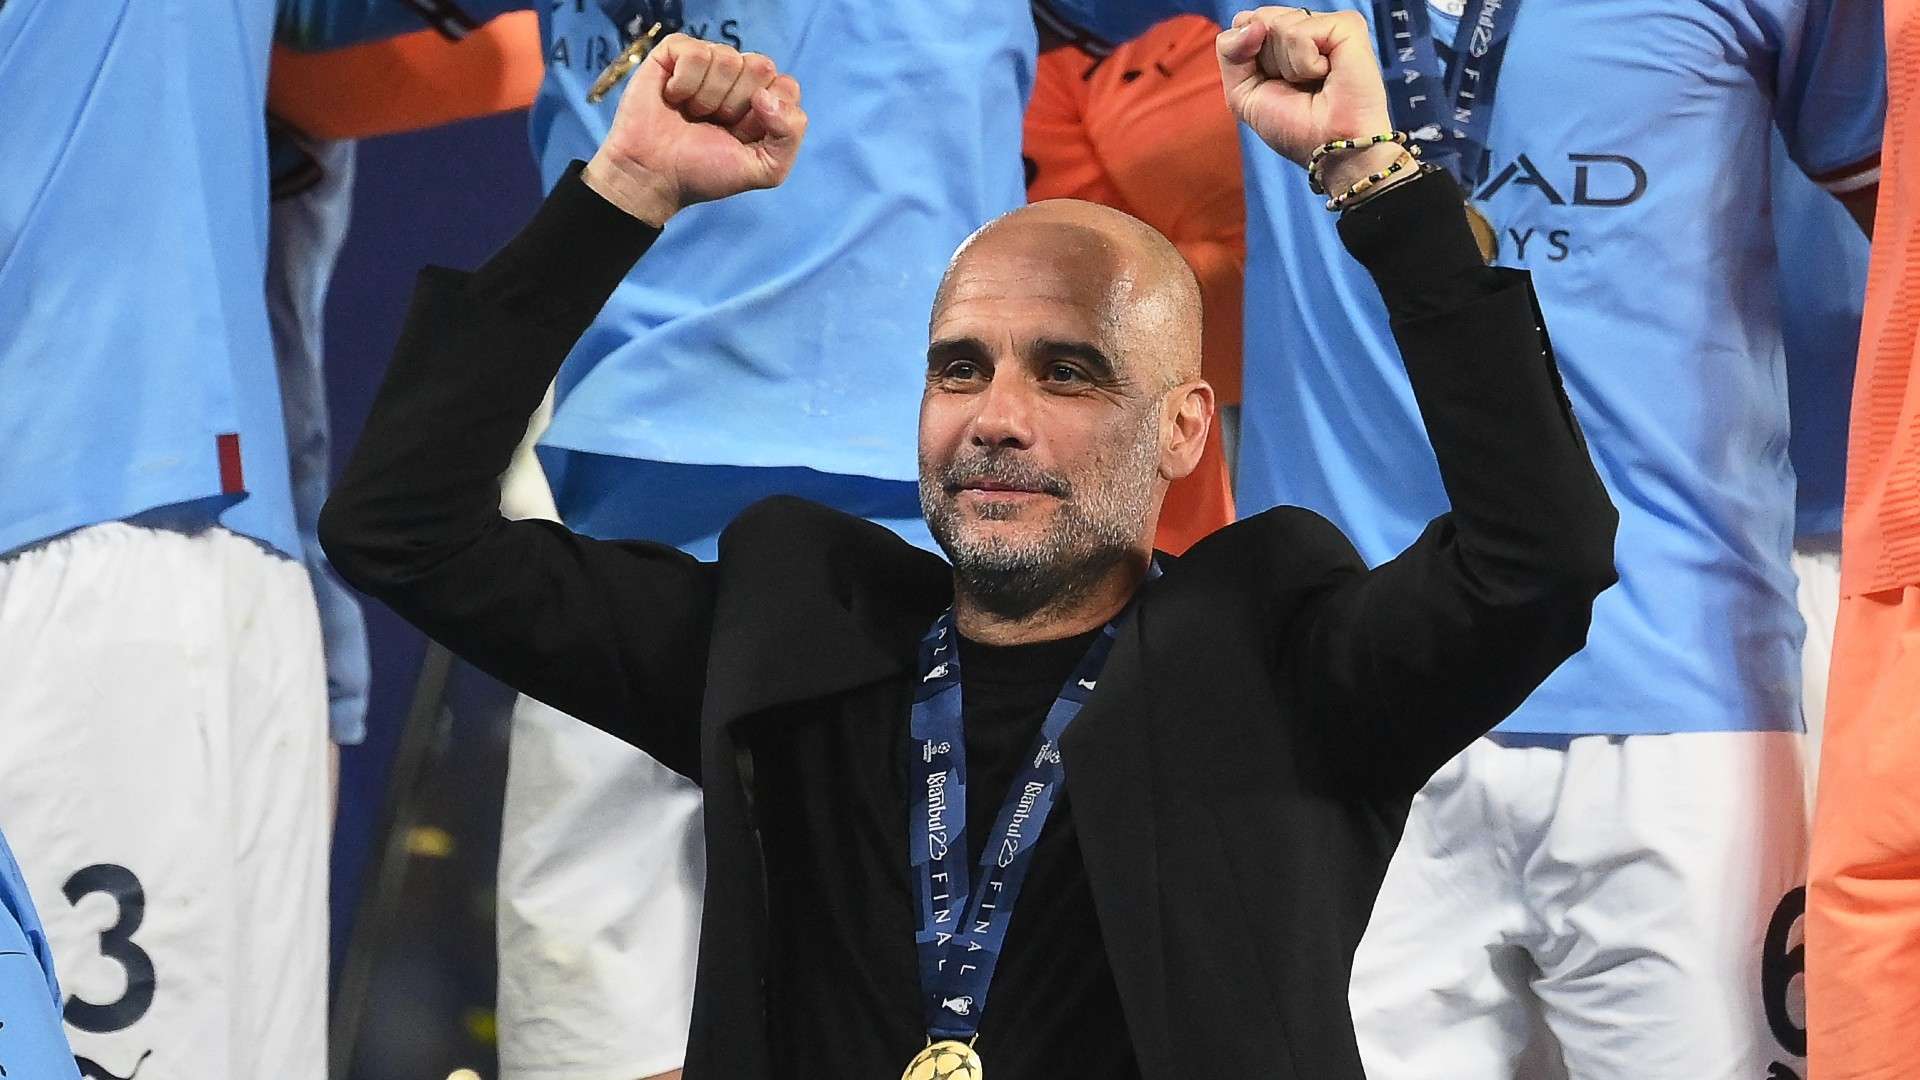 Manchester City's Spanish manager Pep Guardiola